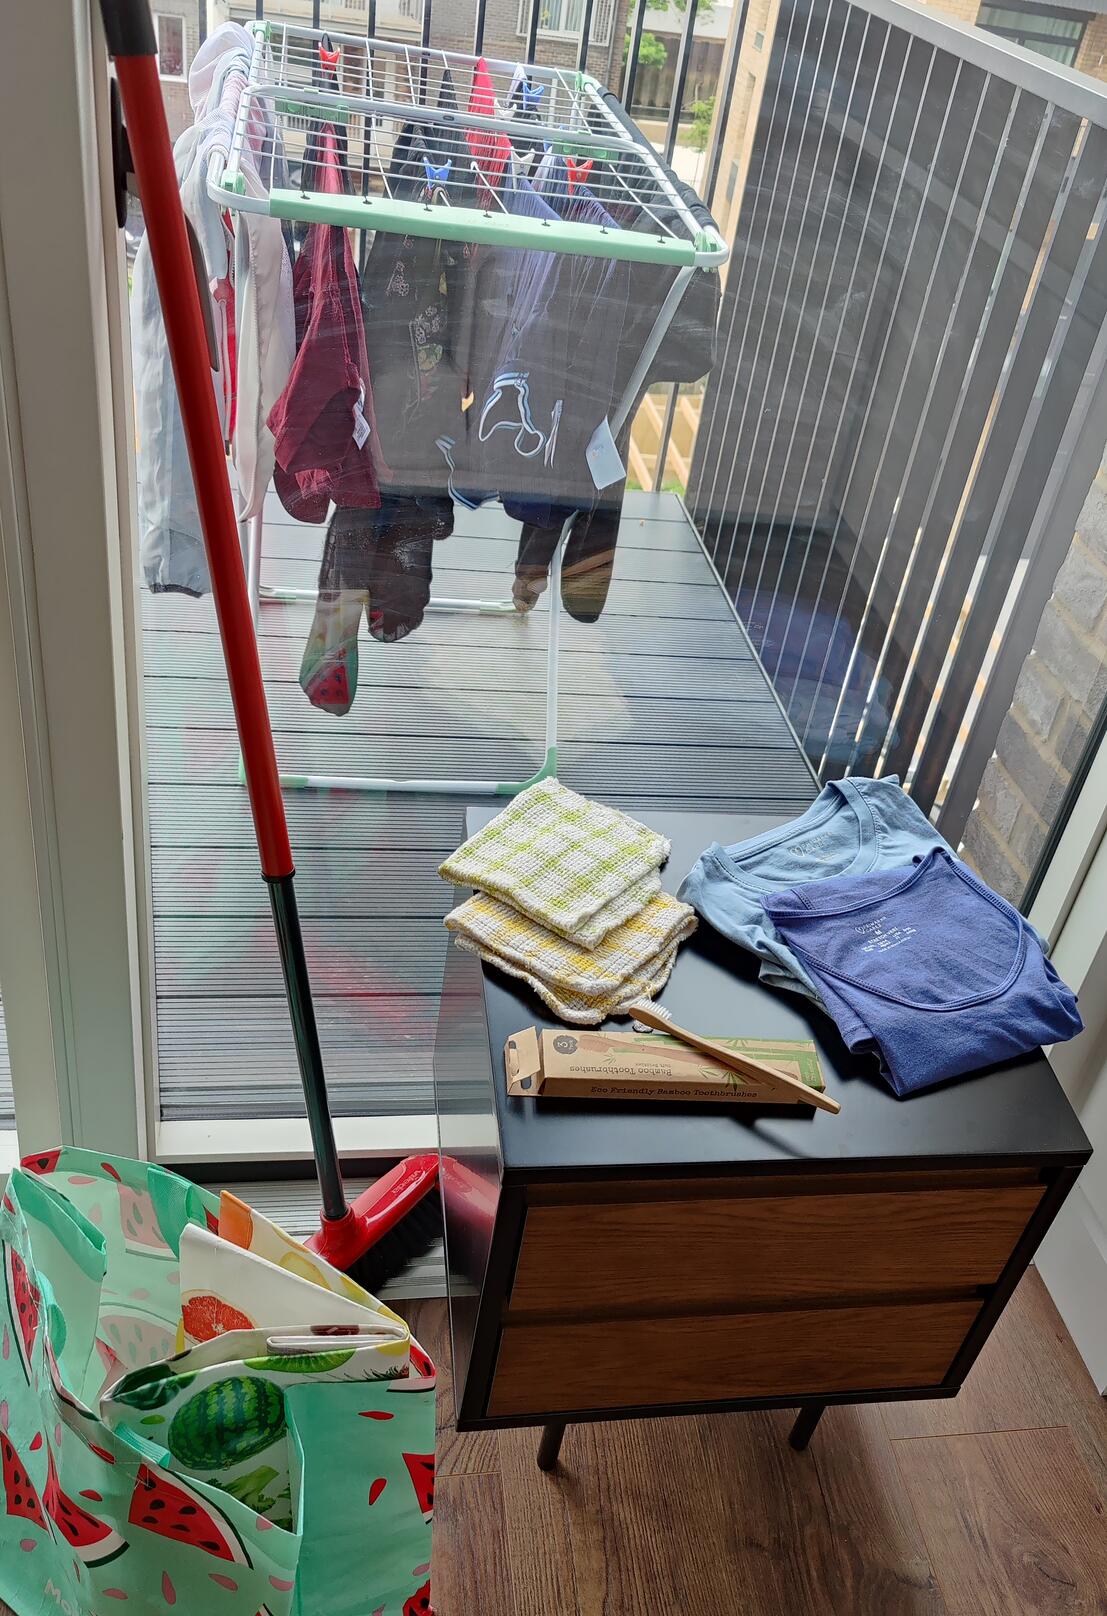 "A glimpse of one of my small conscious contributions to support sustainability. Selecting a place to live with good light and air drying my clothes, this is one of the small steps that I am taking to show support for a sustainable future."